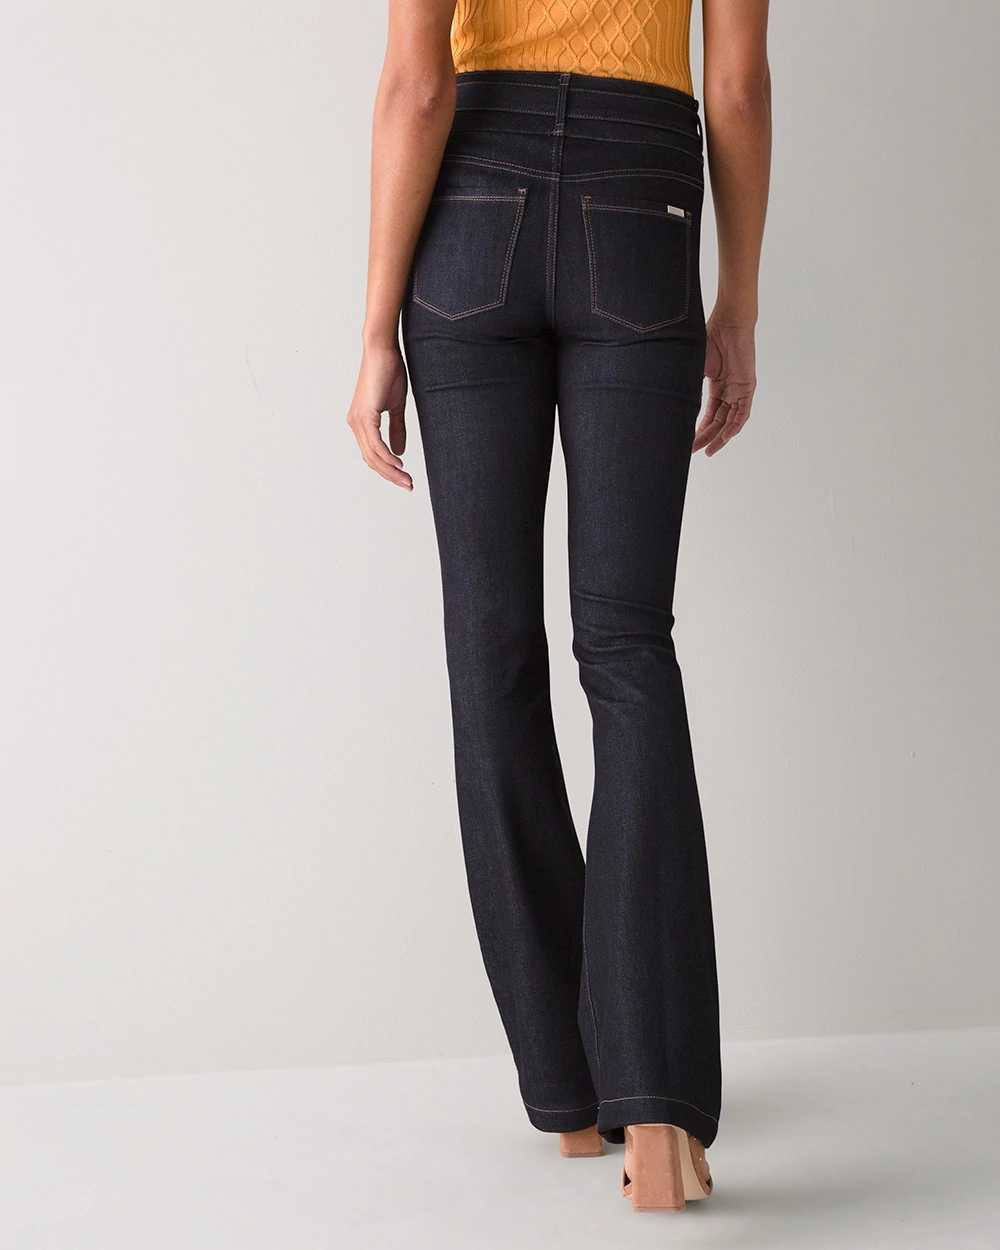 Petite High-Rise Sculpt Skinny Flare Jeans click to view larger image.